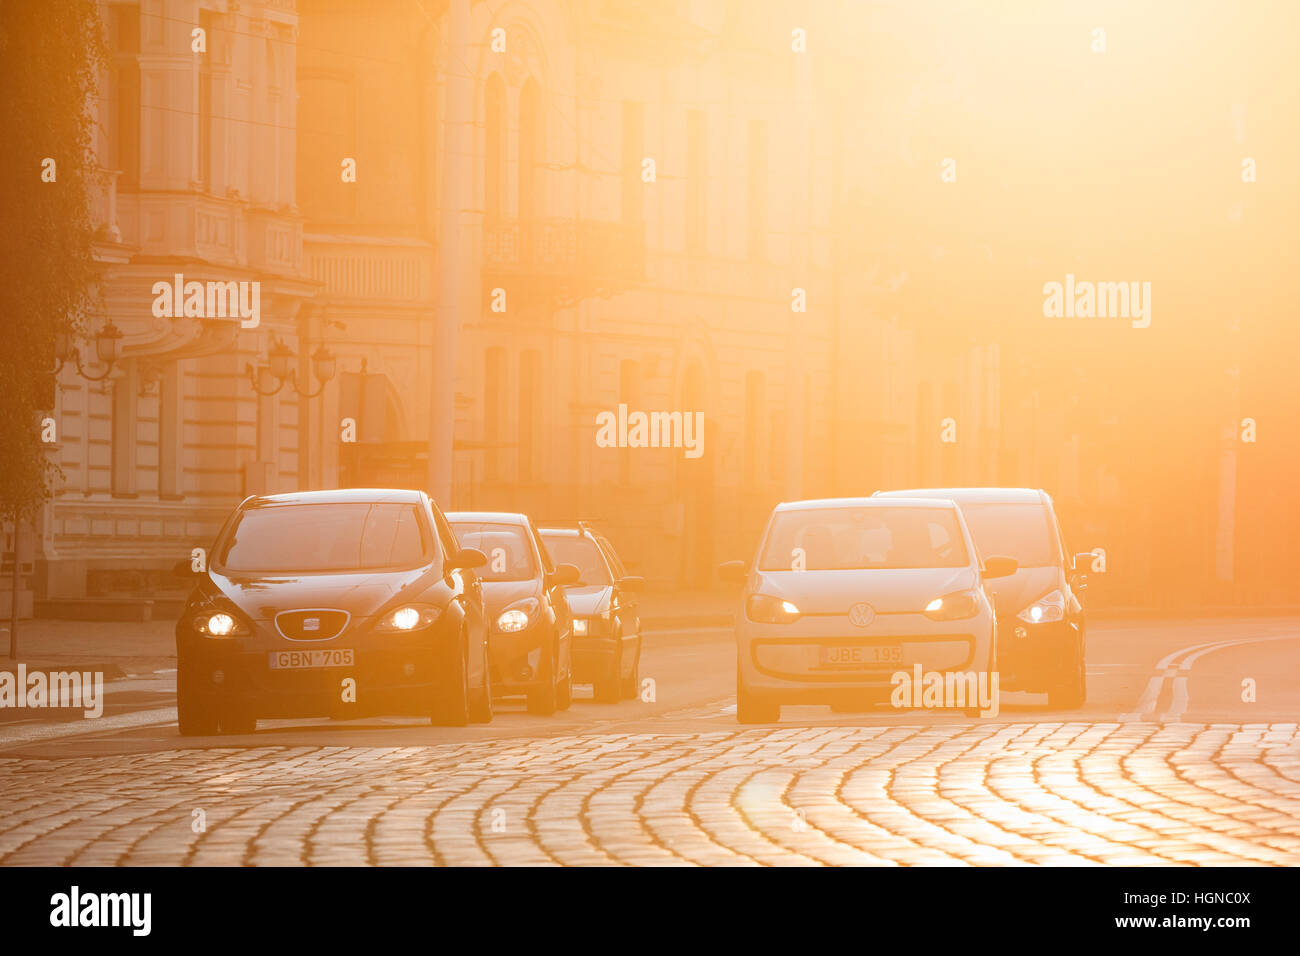 Vilnius, Lithuania  - July 8, 2016: Black Seat Leon And White Volkswagen Eco Up Cars Are At The Head Of Traffic On Zygimantu Street, The Paved Road In Stock Photo